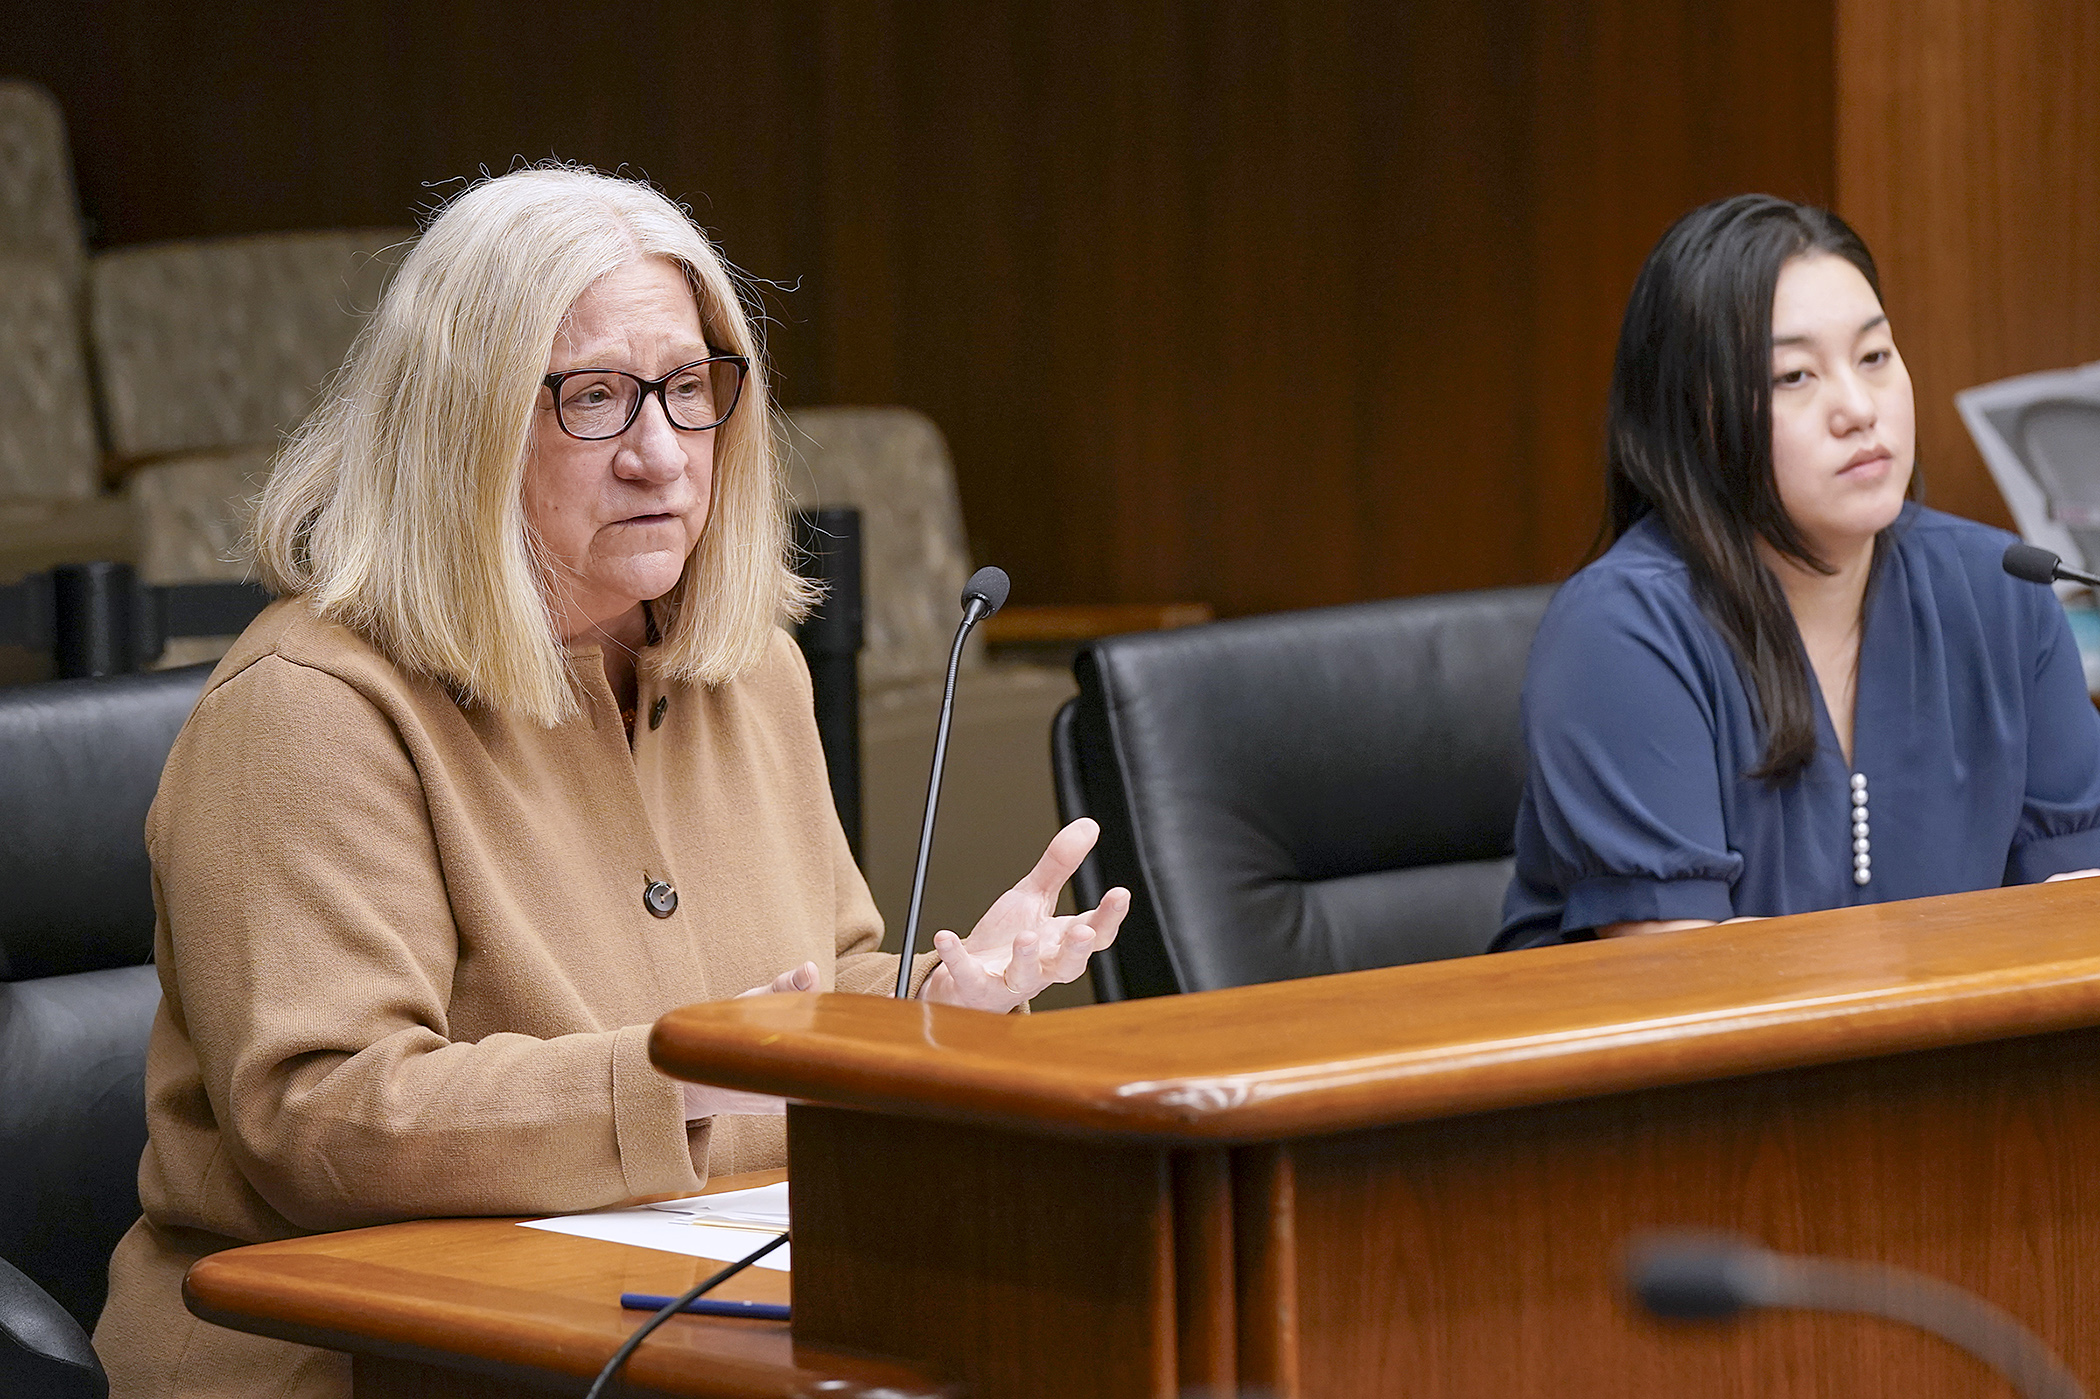 Sue Abderholden, executive director of NAMI Minnesota, testifies March 18 in support of HF4563. Sponsored by Rep. Samantha Vang, the bill would establish the Mental Health and Substance Use Disorder Education Center. (Photo by Michele Jokinen)